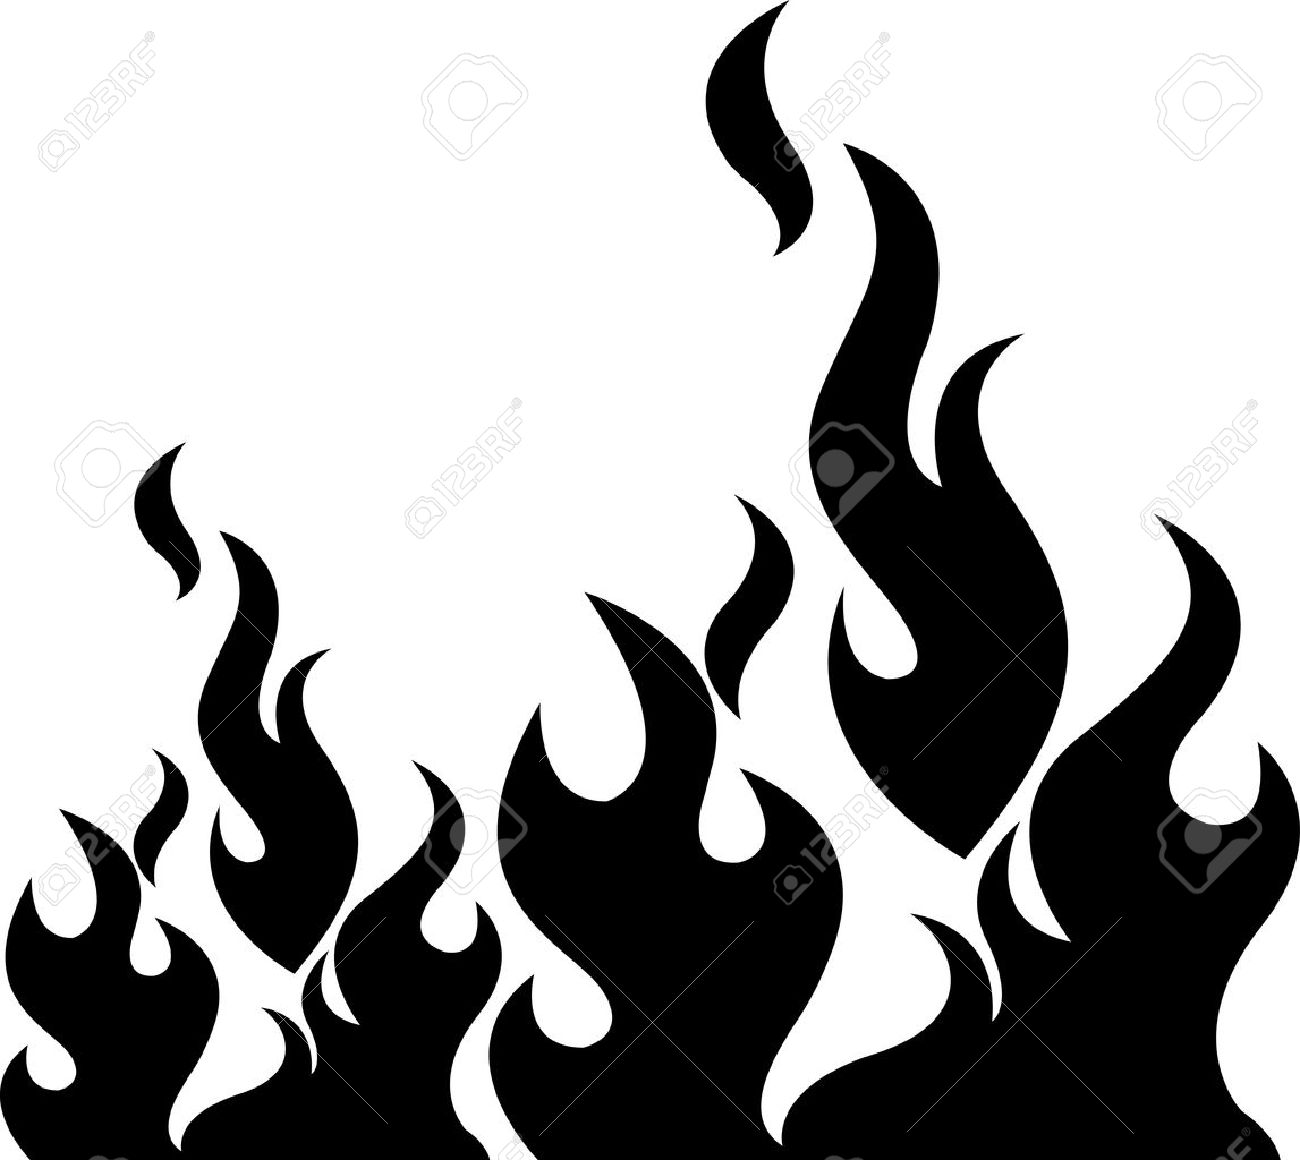 Illustration art of a black flame with isolated background.